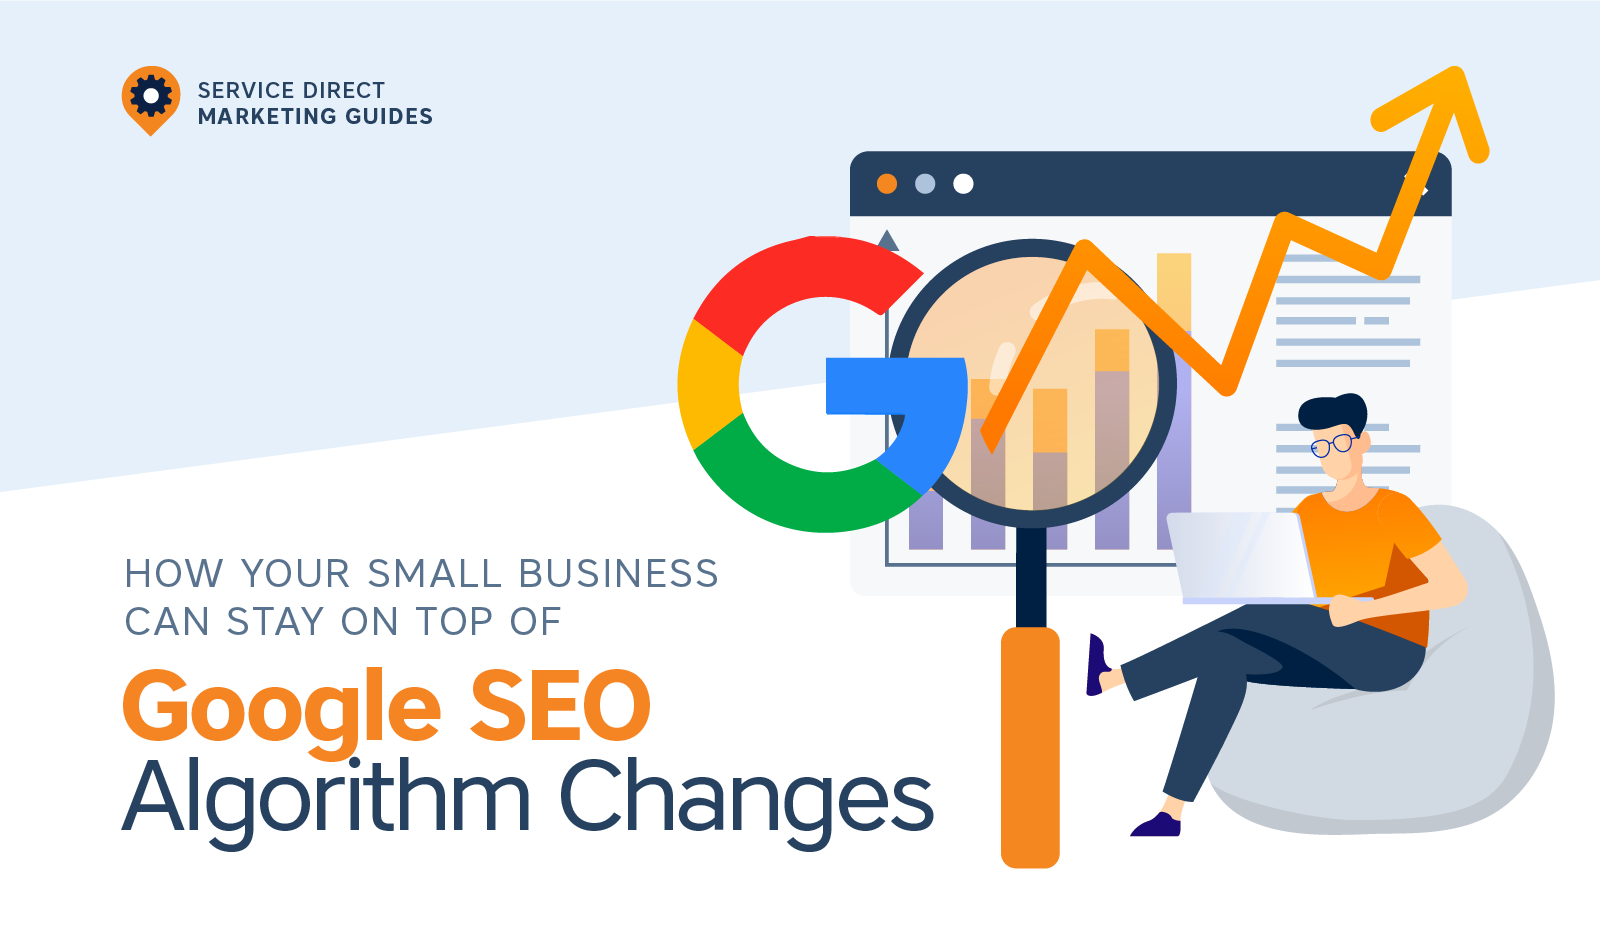 How Your Small Business Can Stay on Top of Google Algorithm Changes